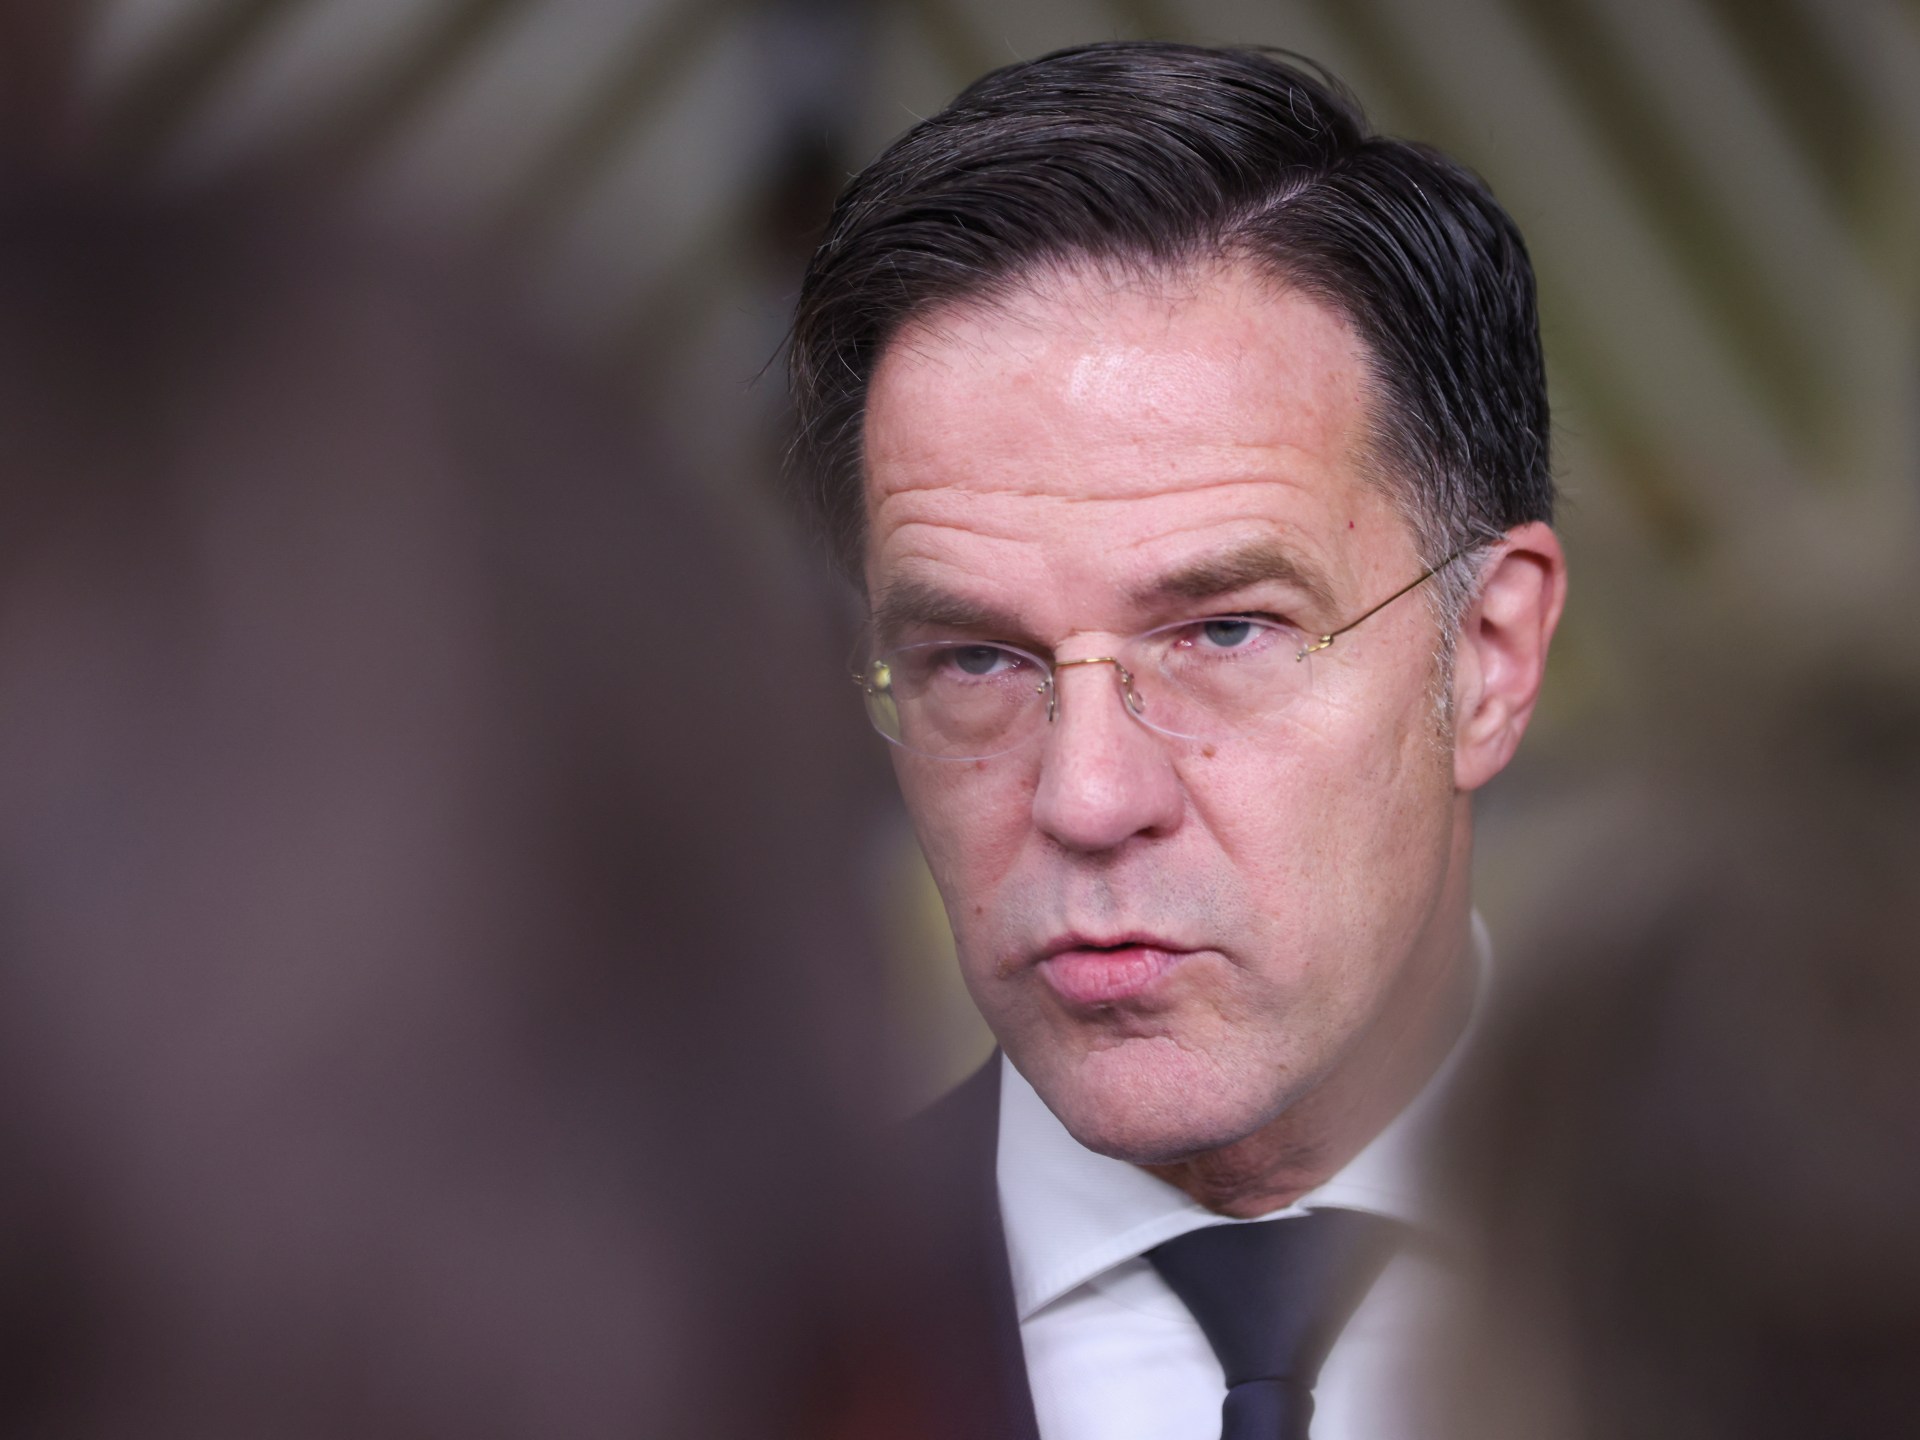 US, European powers again outgoing Dutch PM Mark Rutte as subsequent NATO head | NATO Information